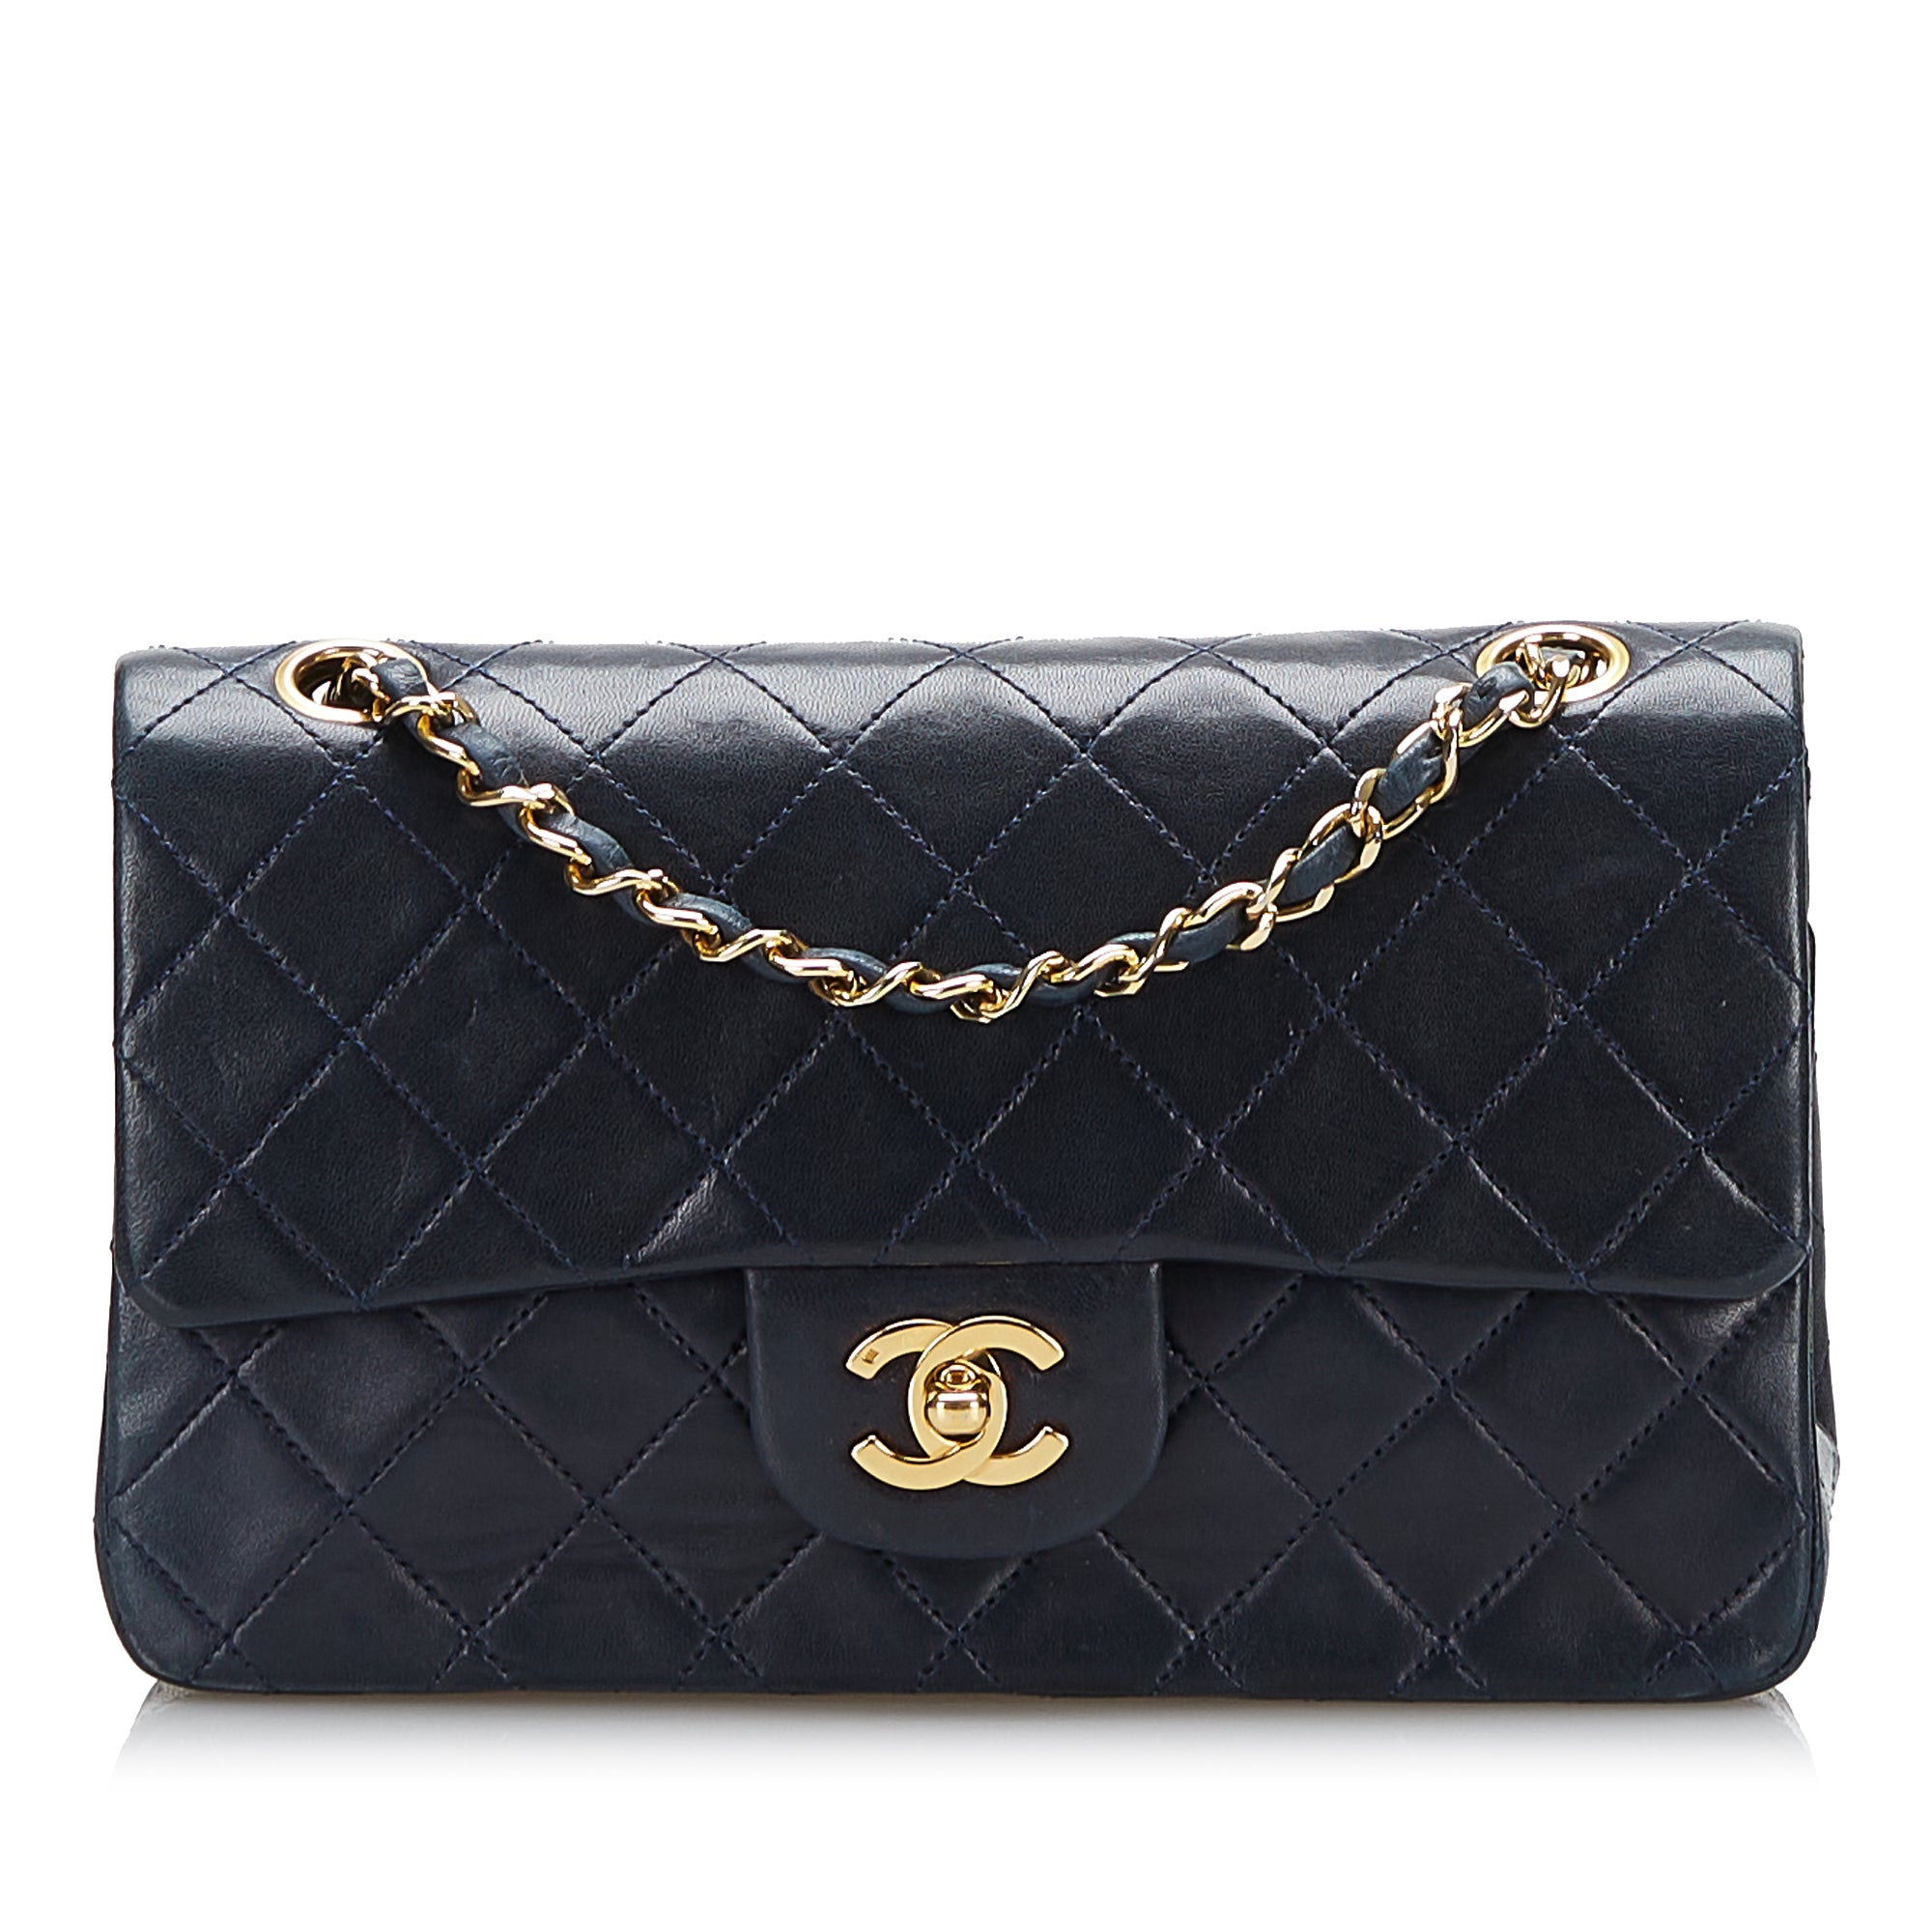 Black Chanel Small Classic Lambskin Double Flap Shoulder Bag